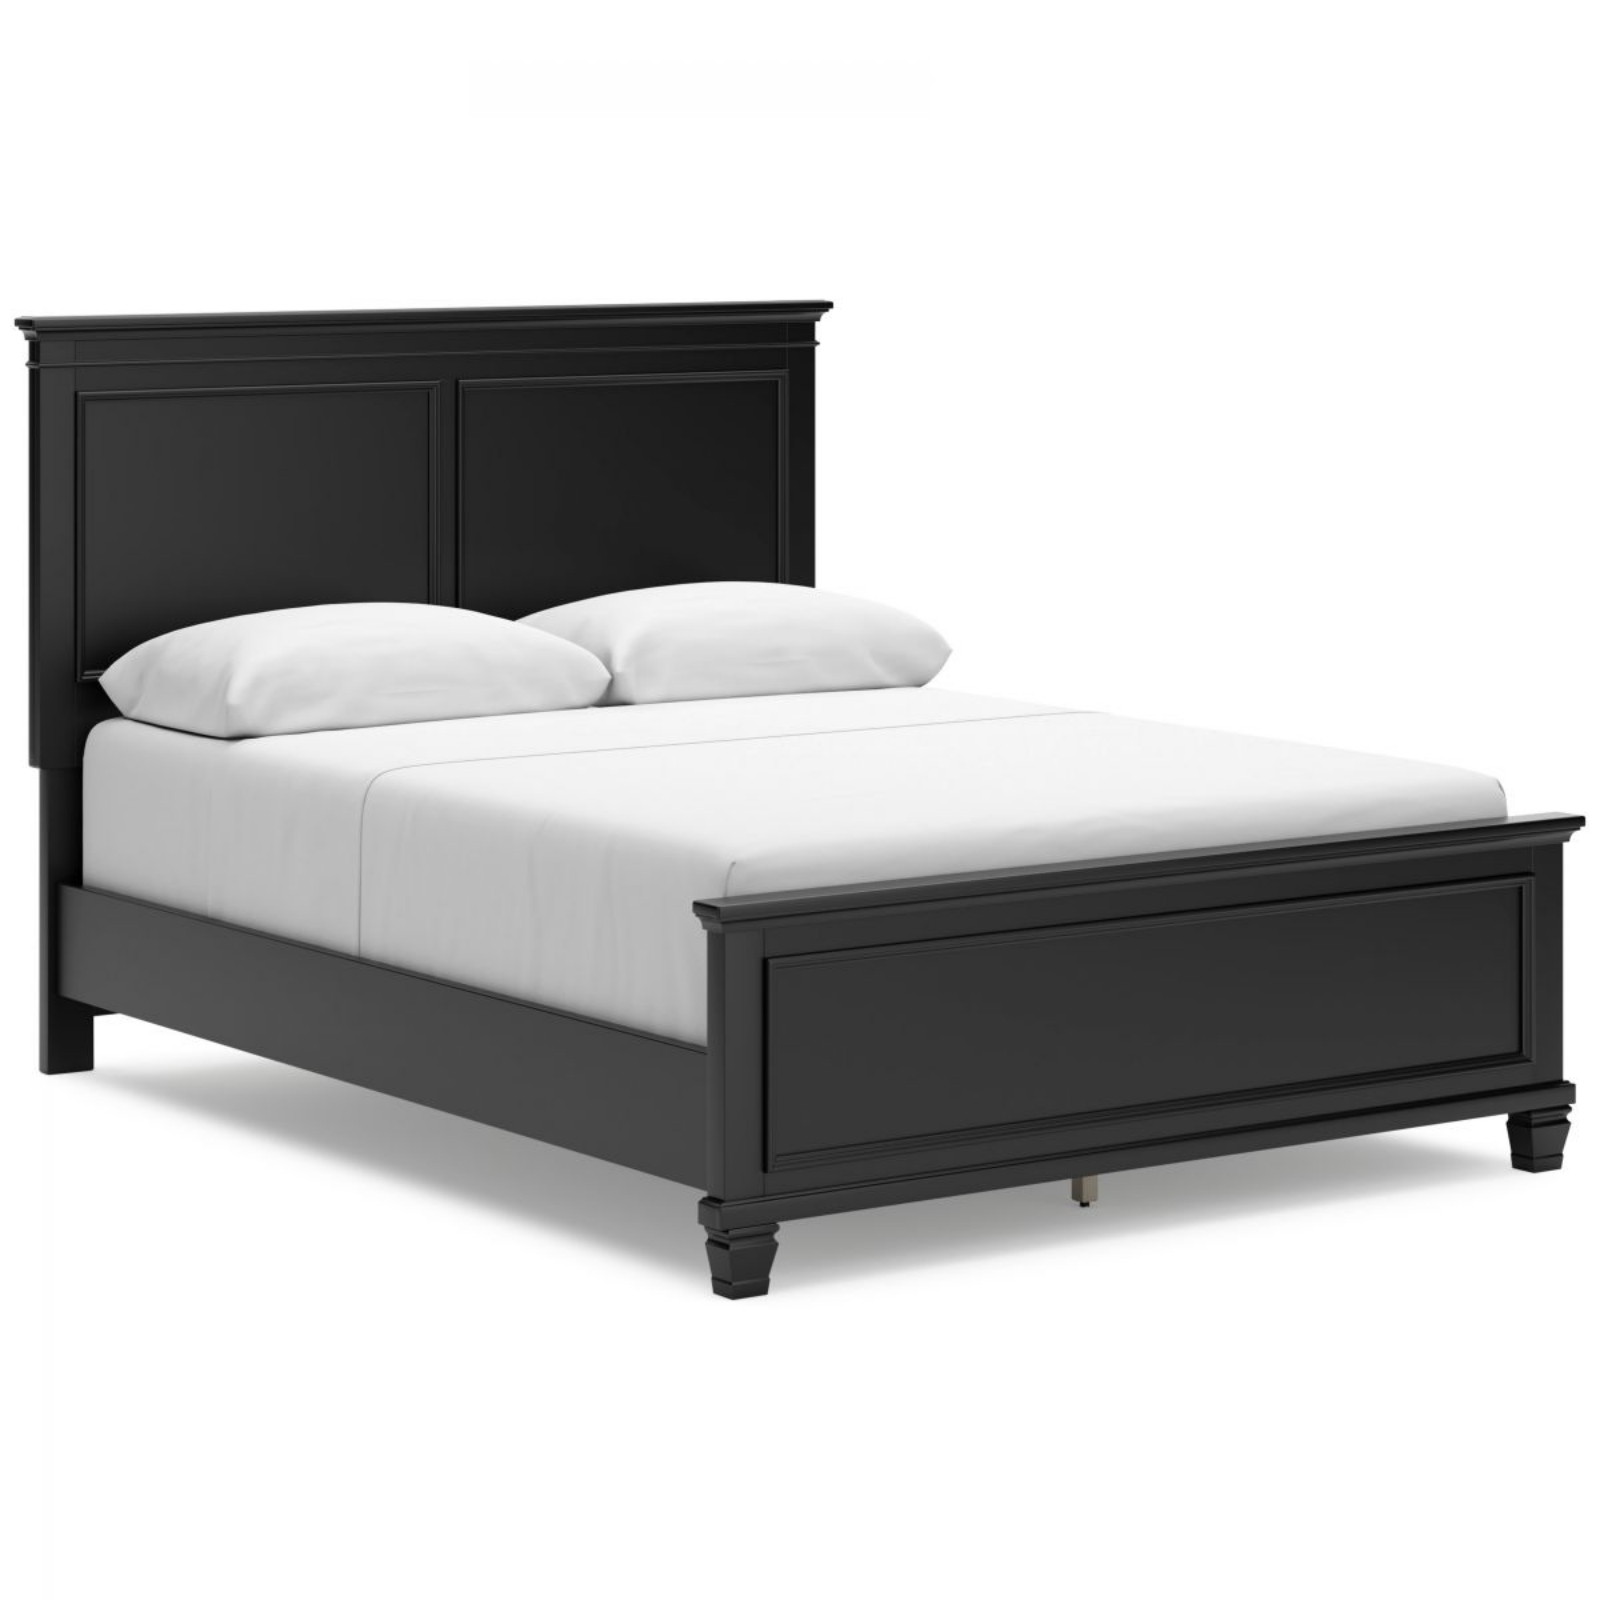 Picture of Lanolee Queen Size Bed